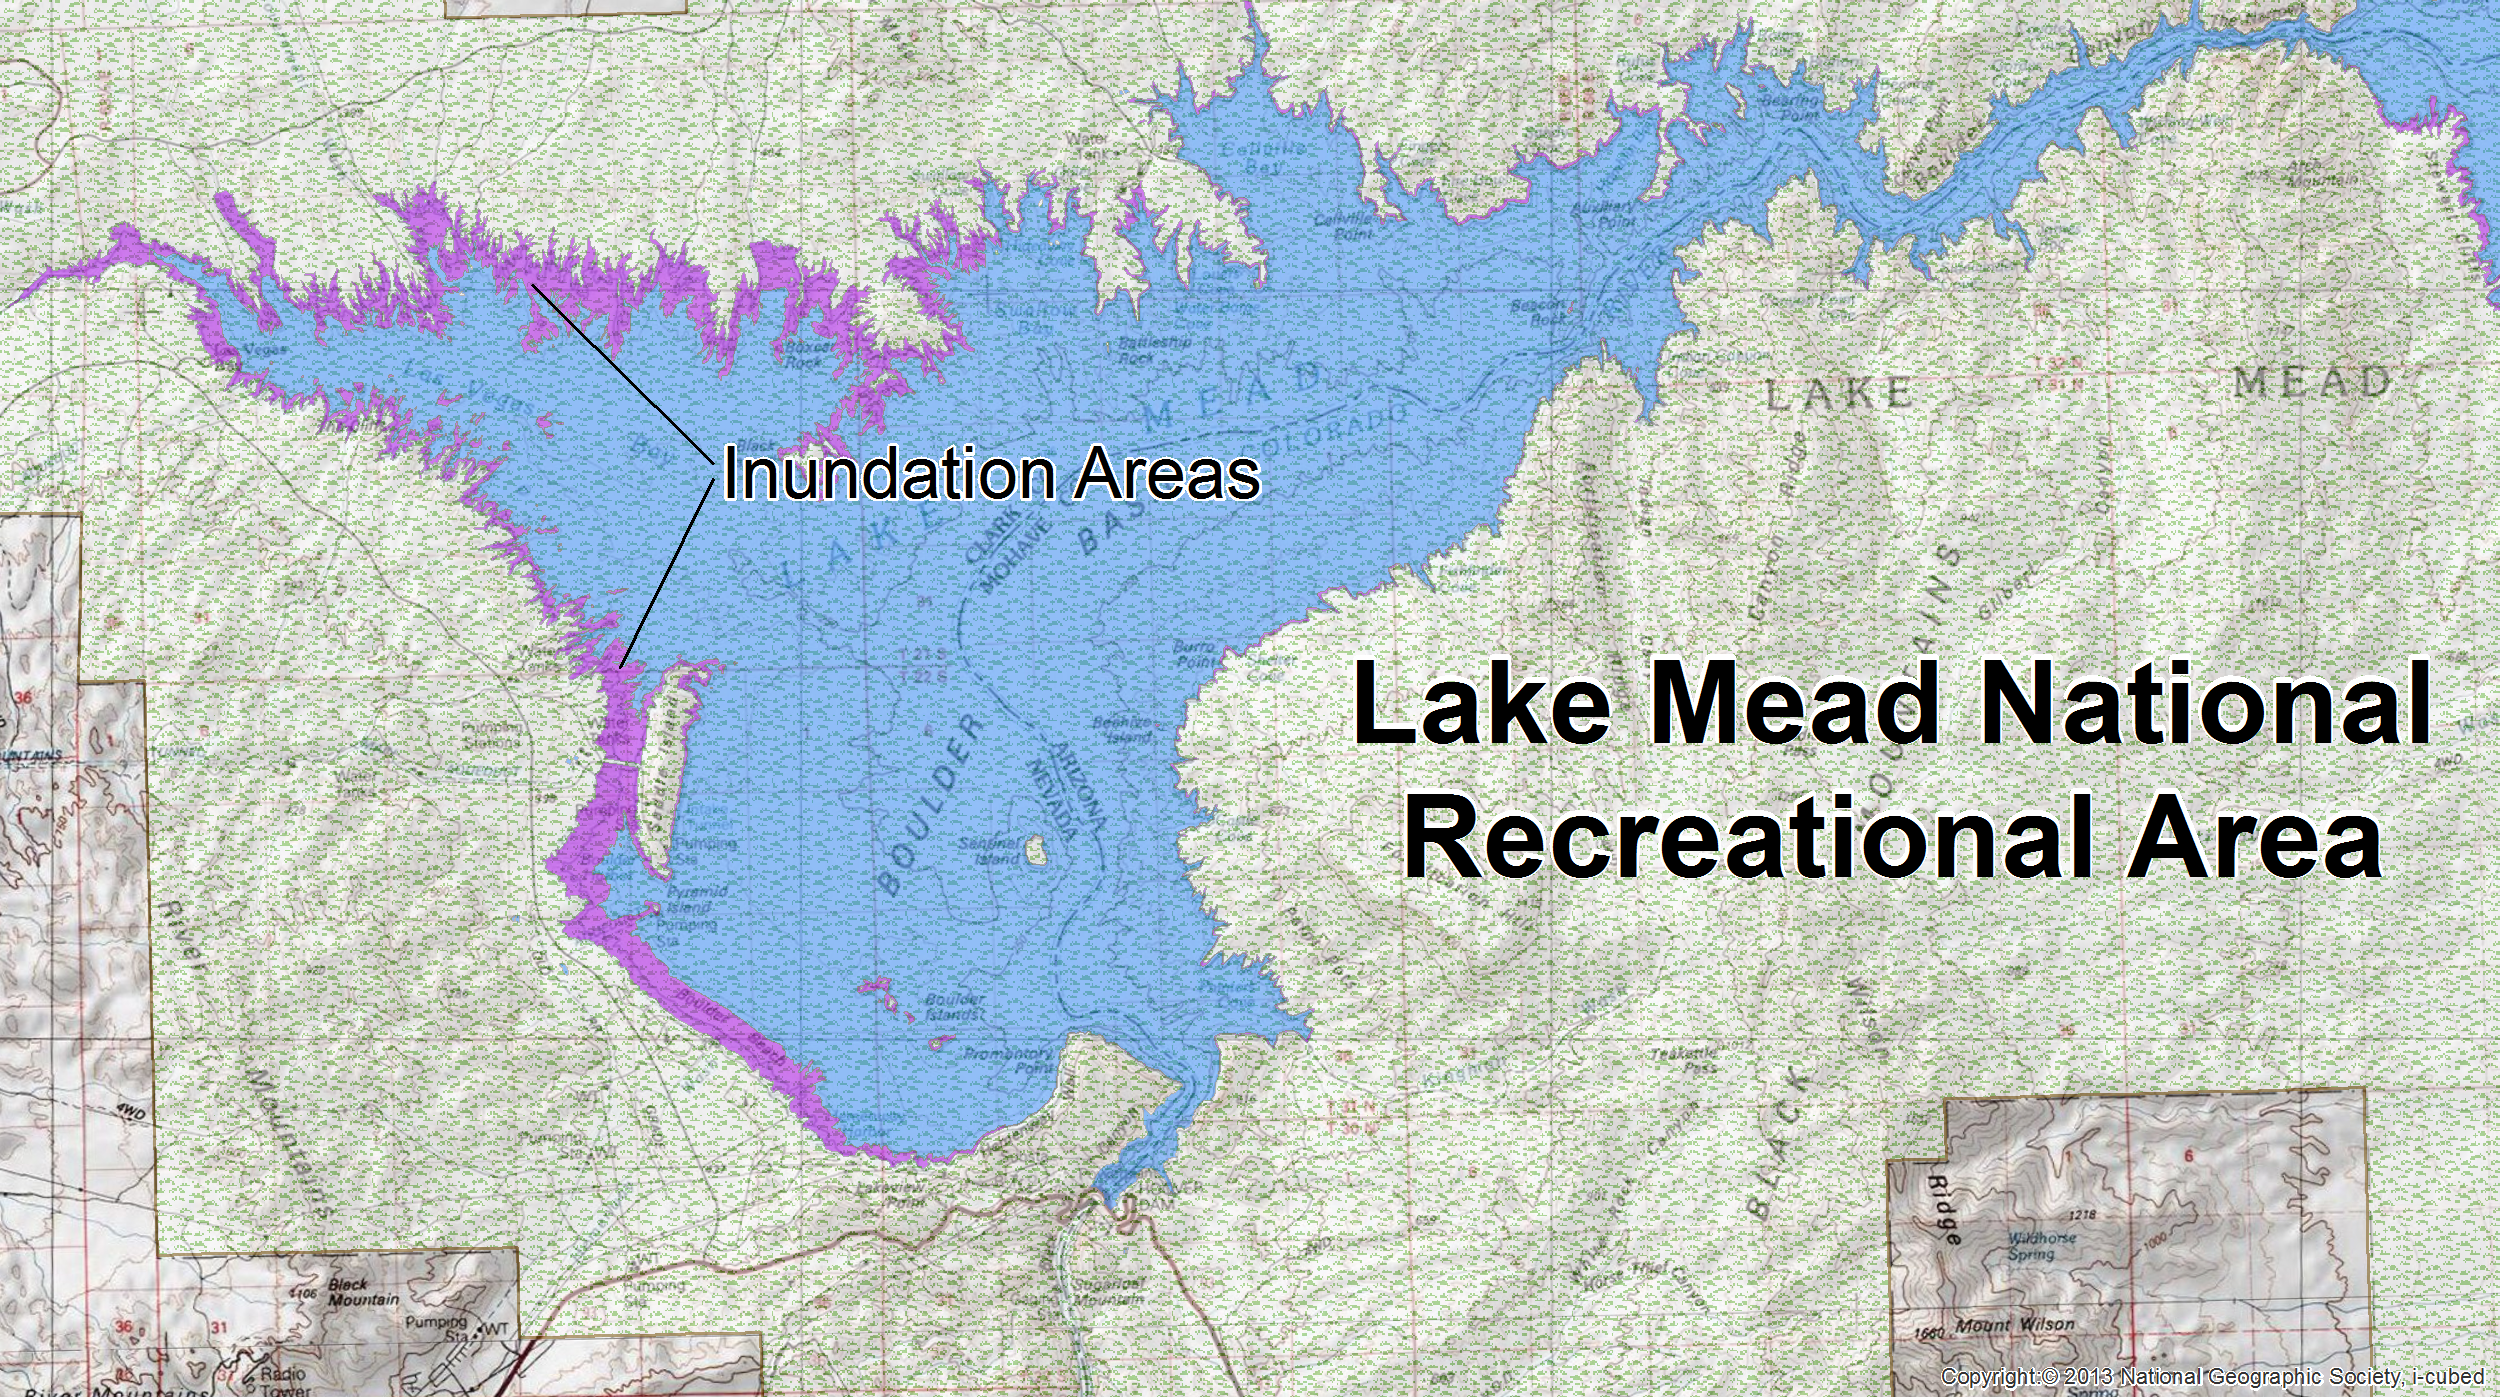 The purple polygon is the NHDArea representation of the inundation areas surrounding Lake Mead.